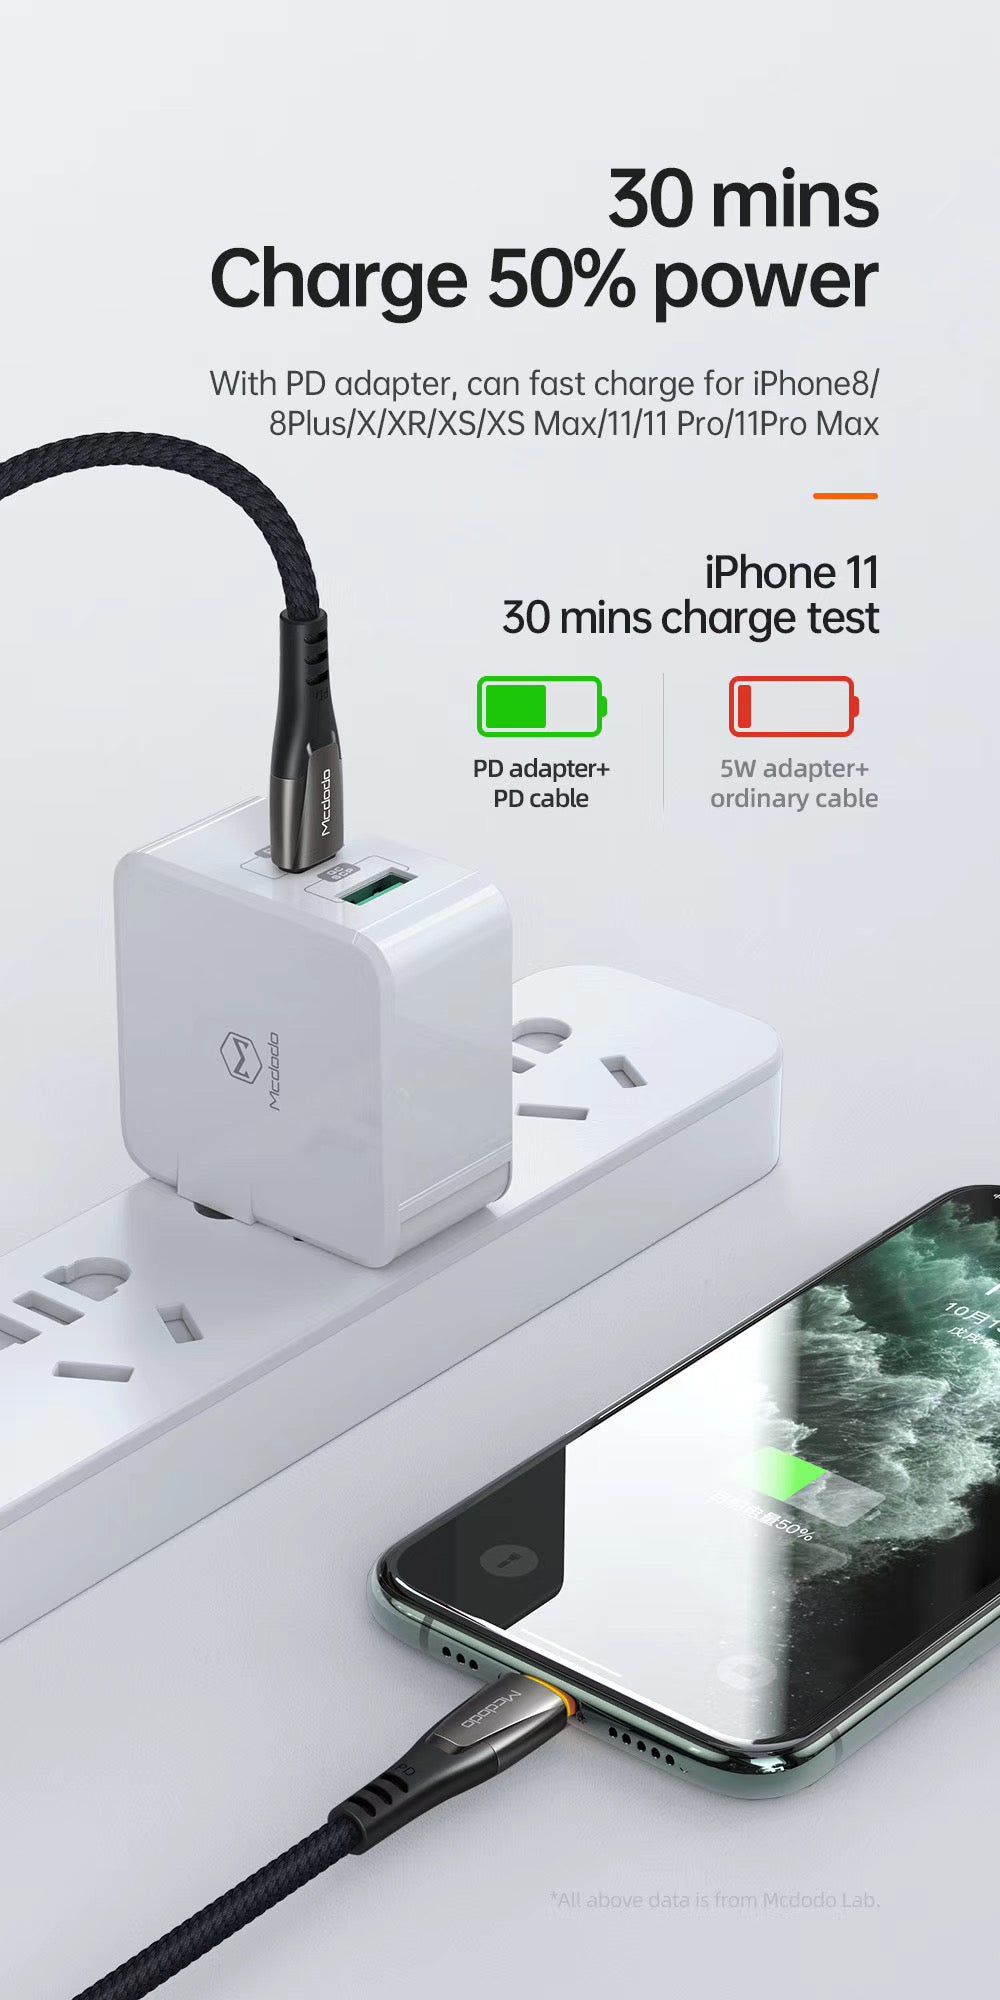 Mcdodo 36 Watt PD Super Quick Charge Data Charging Cable for Apple iPhone 11, 11 Pro, 11 Pro Max